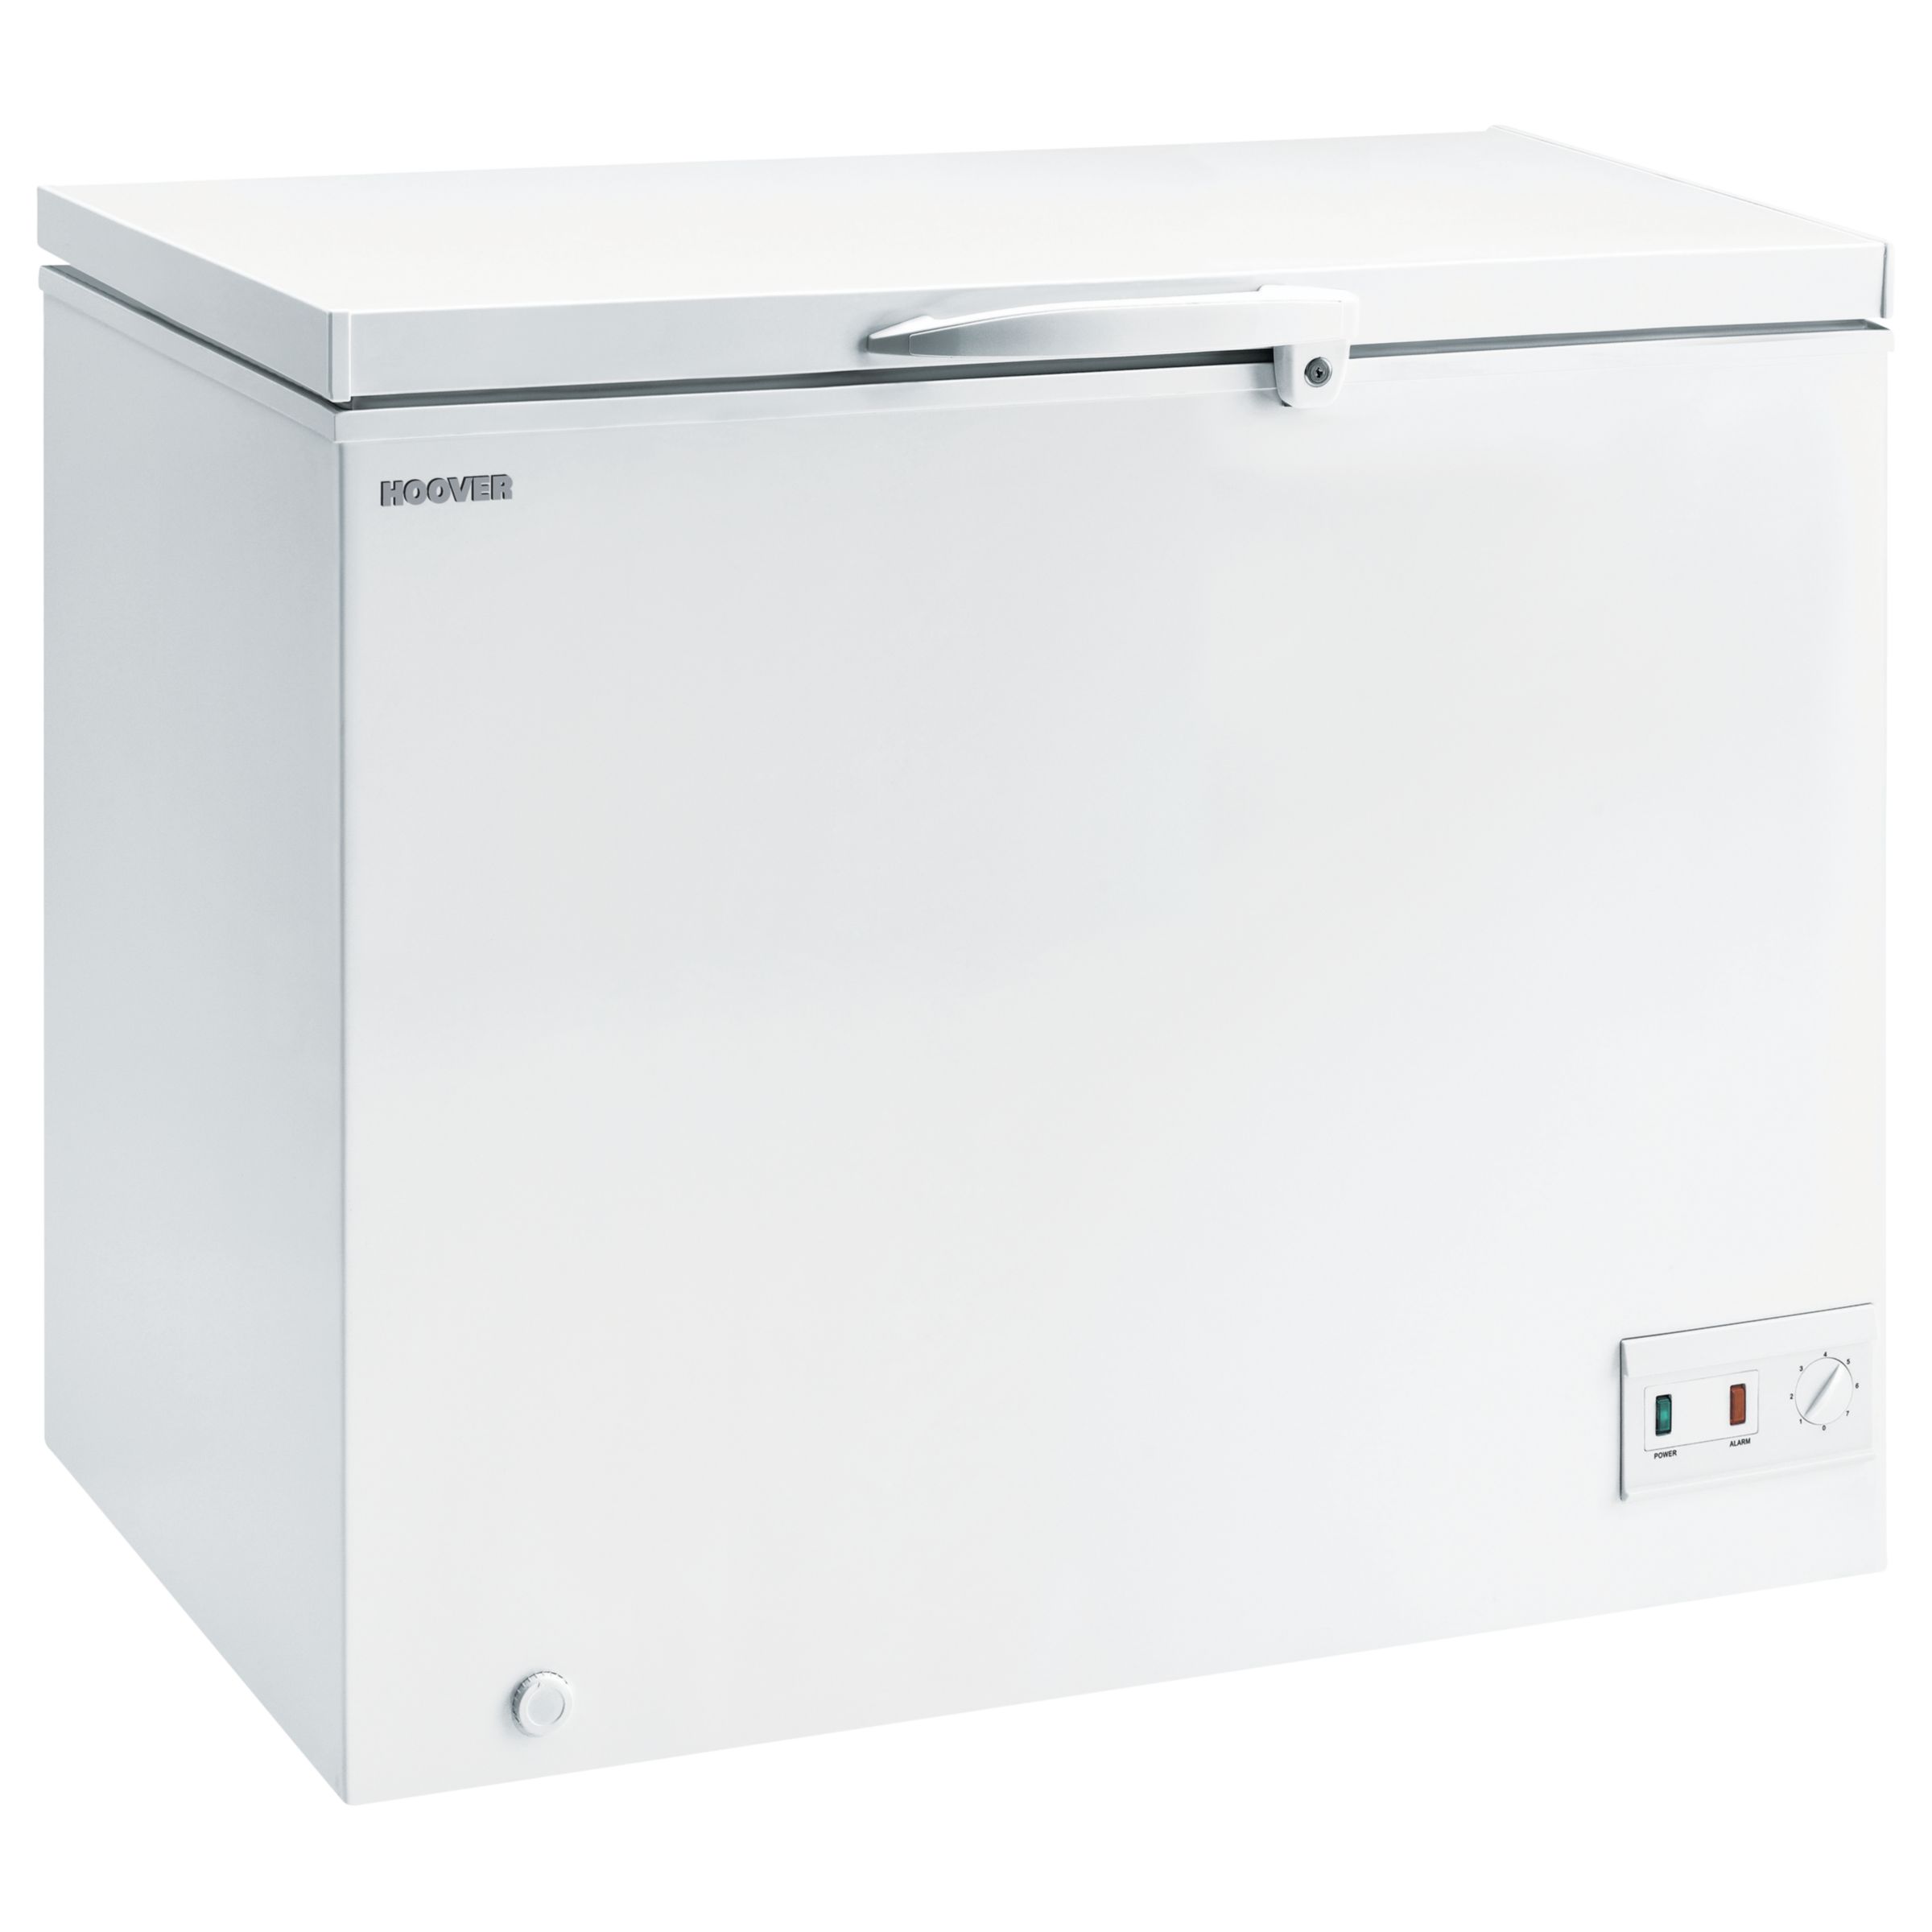 Hoover CFH157AWK Freestanding Chest Freezer A+ Energy Rating 73cm Wide in White